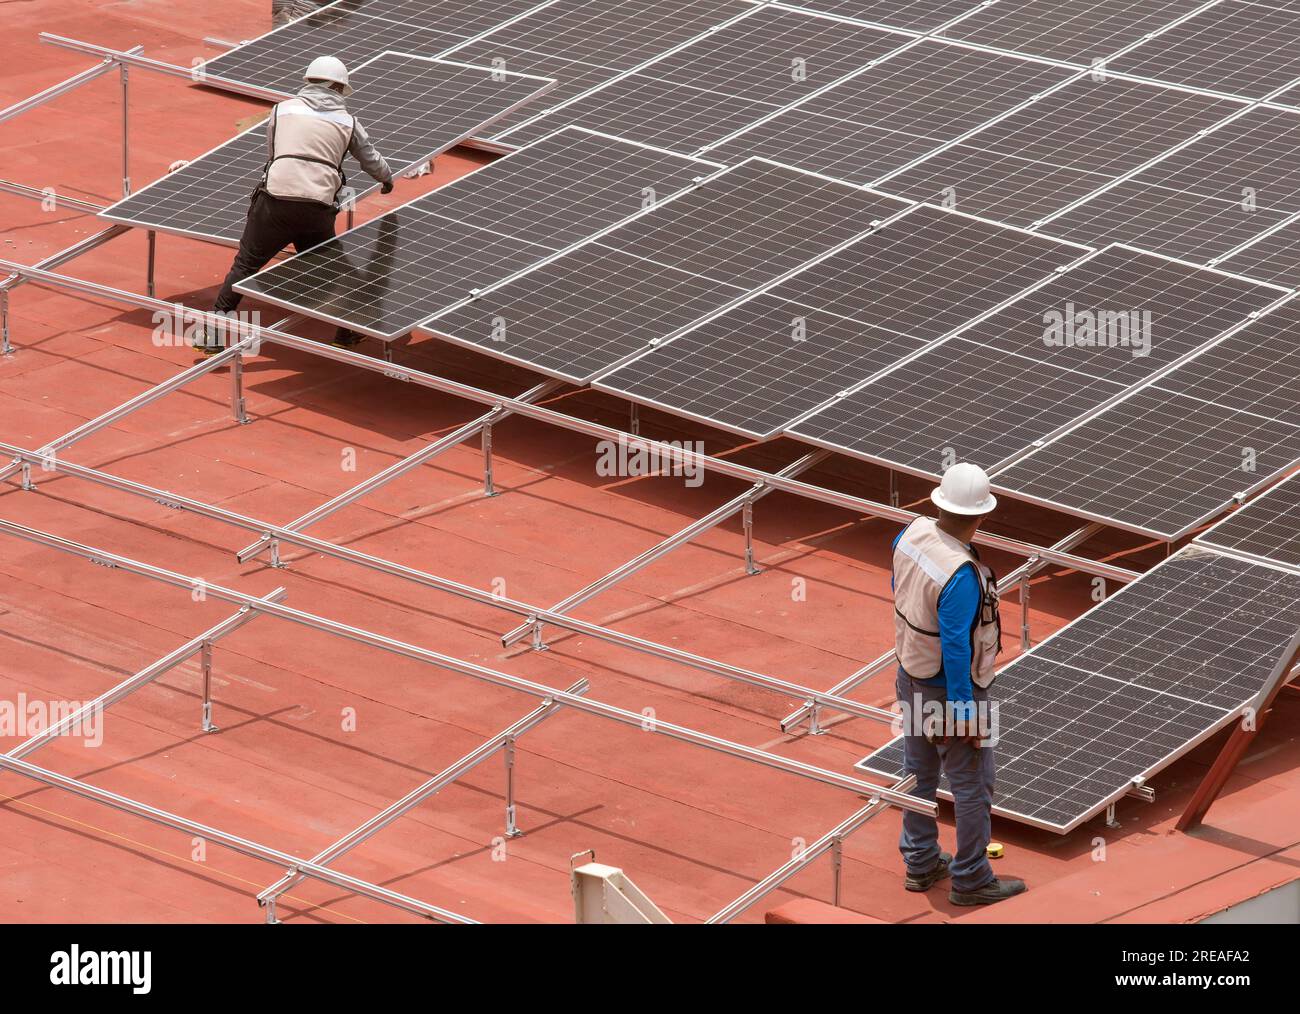 Workers installing solar panels on roof terrace Stock Photo